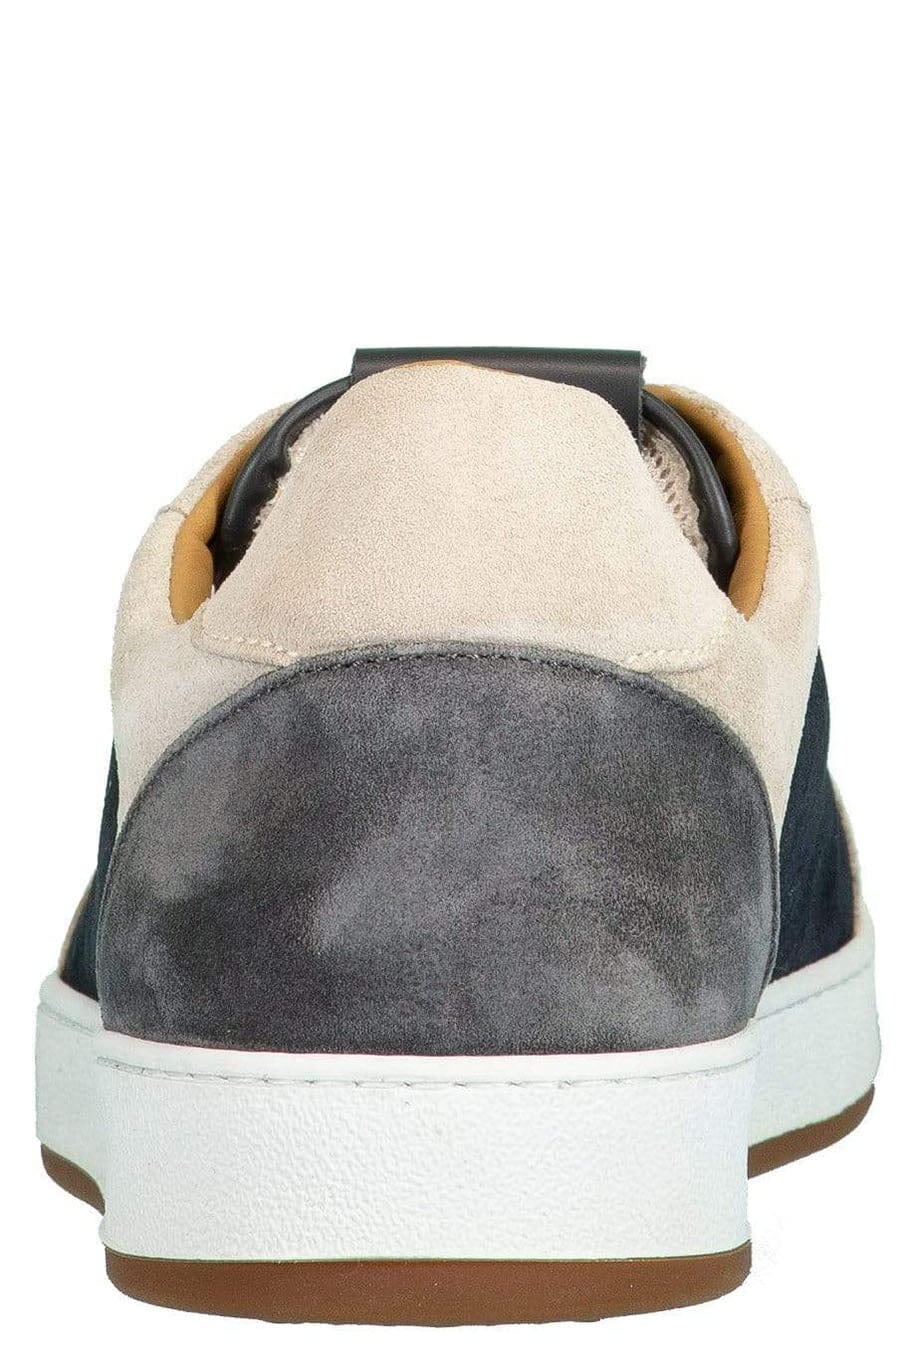 ELEVENTY-Grey and Navy Mixed Media Low Top Sneaker-